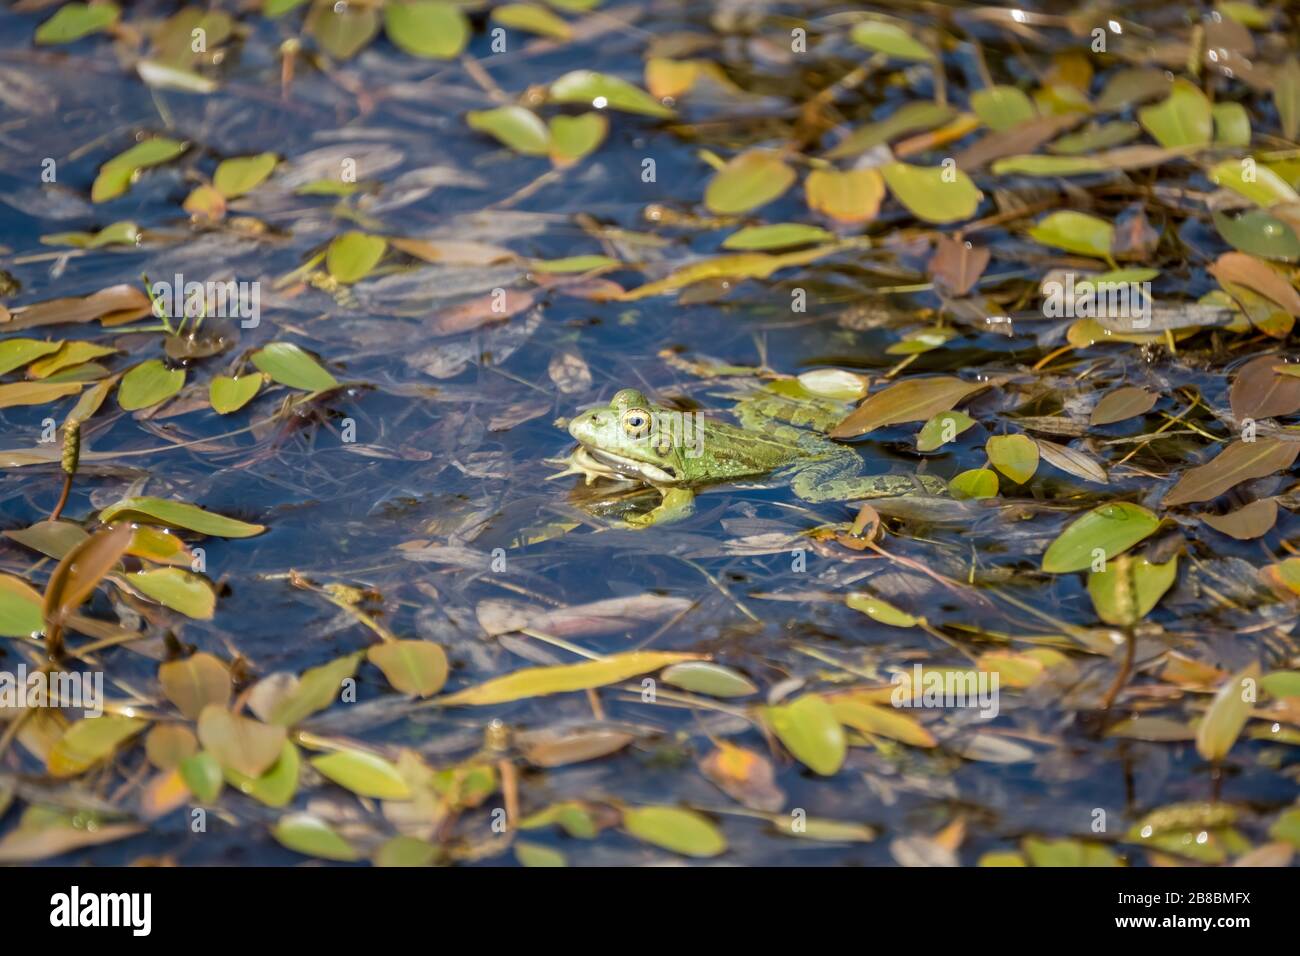 A small green frog in a leafy pool Stock Photo